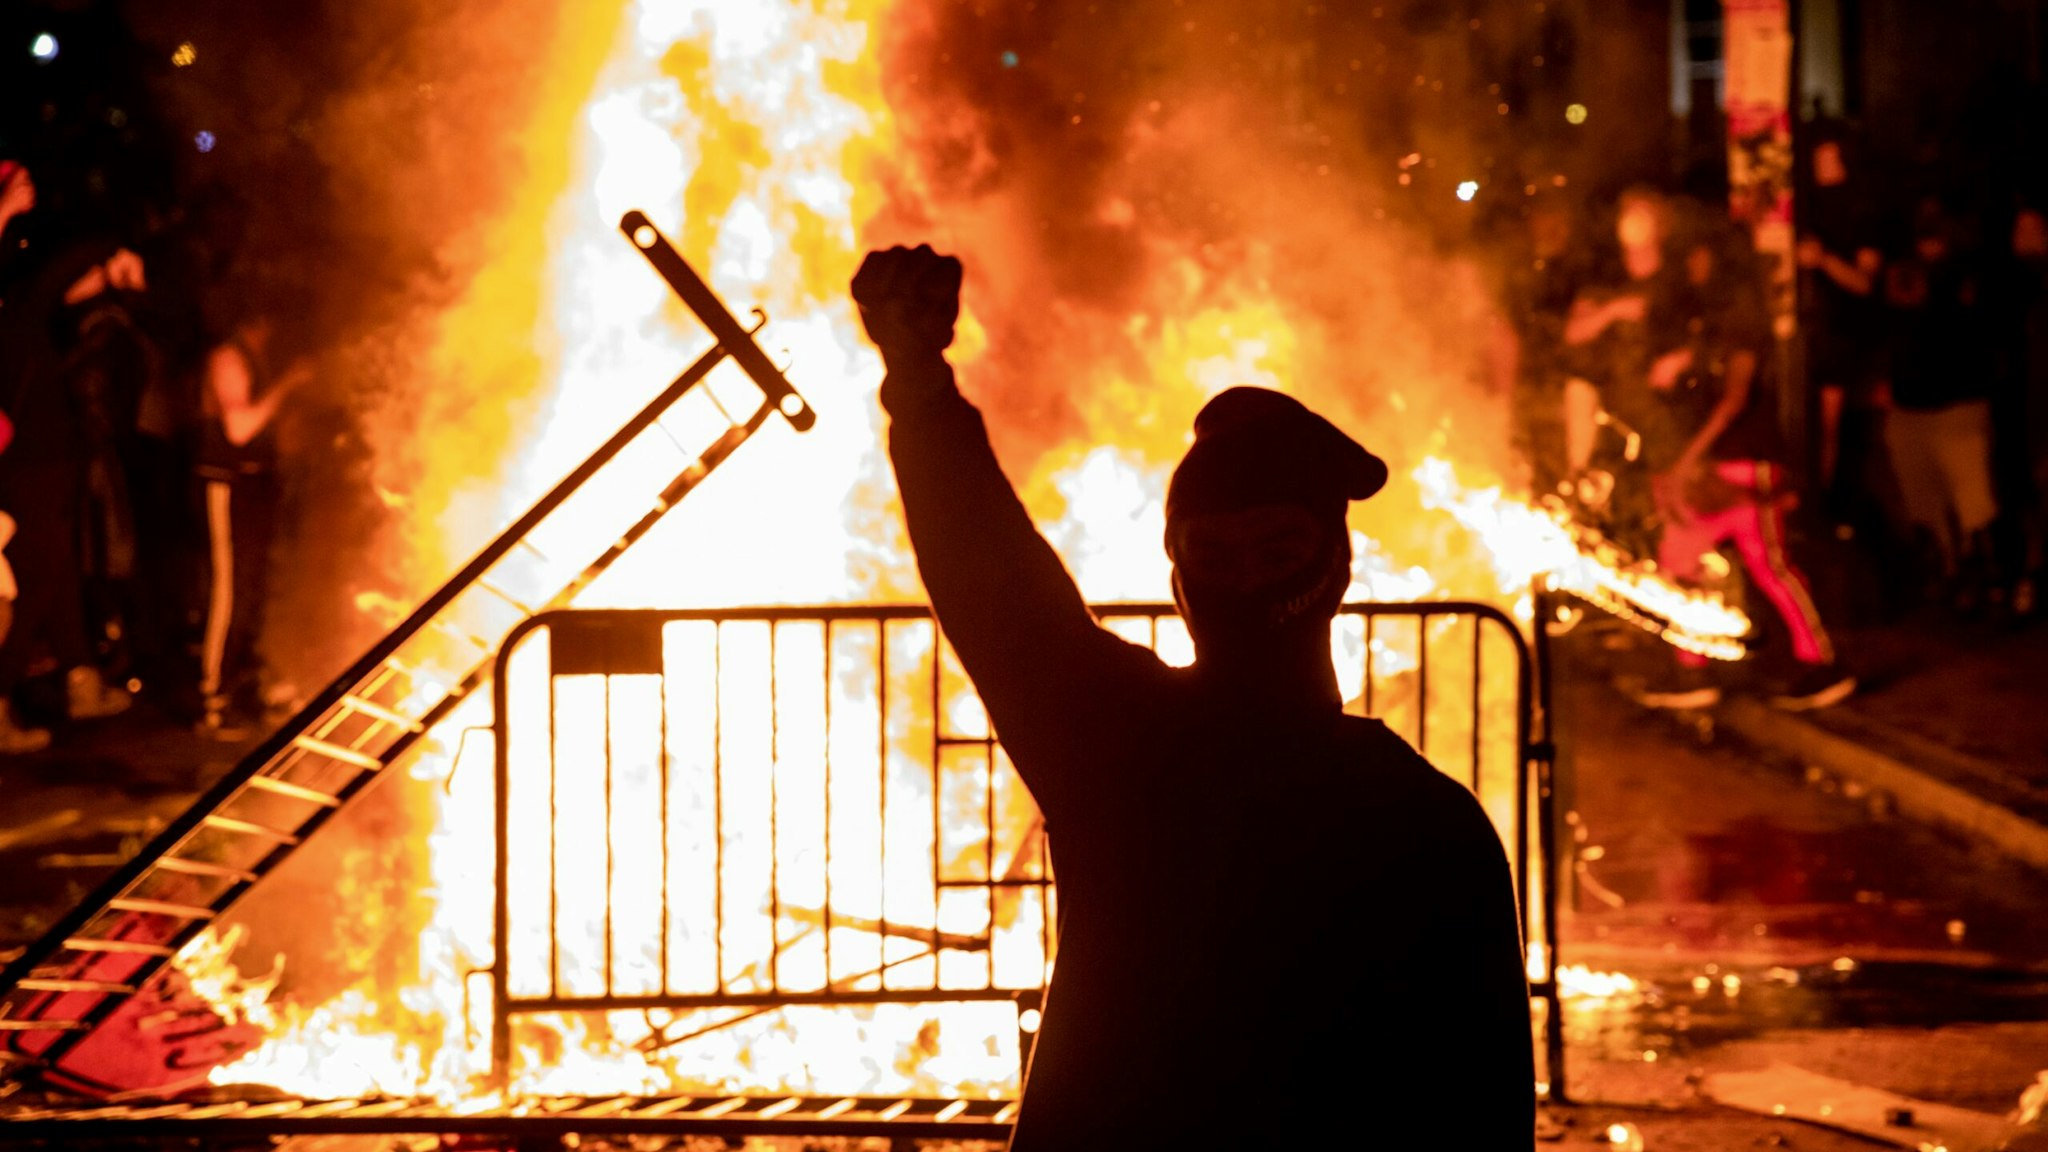 TOPSHOT - A protester raises a fist near a fire during a demonstration outside the White House over the death of George Floyd at the hands of Minneapolis Police in Washington, DC, on May 31, 2020. - Thousands of National Guard troops patrolled major US cities after five consecutive nights of protests over racism and police brutality that boiled over into arson and looting, sending shock waves through the country. The death Monday of an unarmed black man, George Floyd, at the hands of police in Minneapolis ignited this latest wave of outrage in the US over law enforcement's repeated use of lethal force against African Americans -- this one like others before captured on cellphone video. (Photo by Samuel Corum / AFP) (Photo by SAMUEL CORUM/AFP via Getty Images)